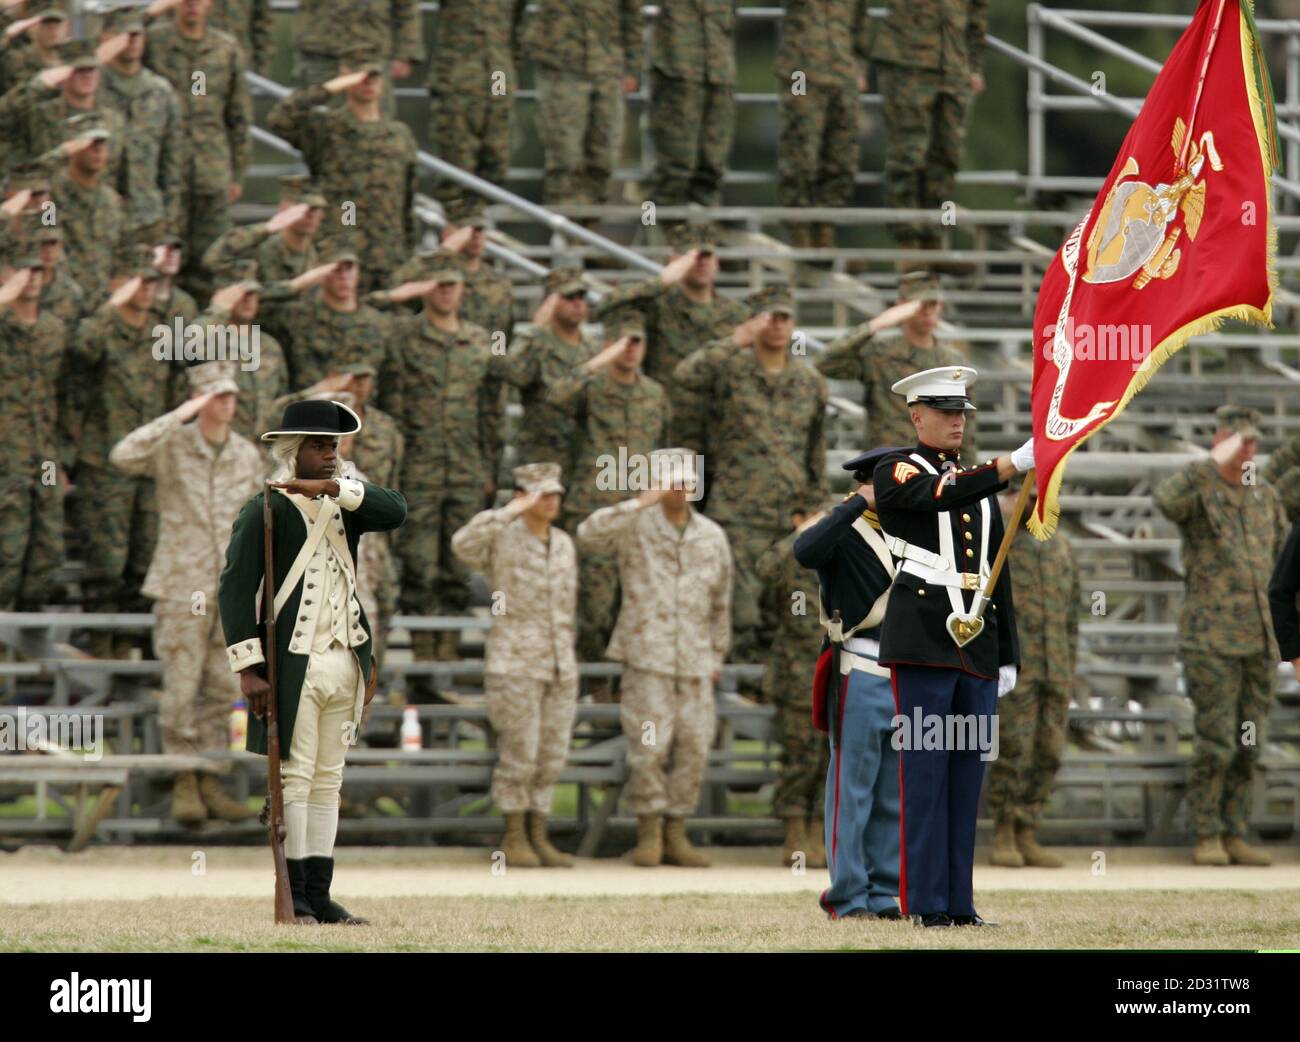 A U.S. Marine dressed in period uniform from 1775 salutes along with fellow Marines in the grand stands during a birthday pageant celebrating the the U.S. Marine Corps' 230th birthday at Camp Pendleton, California November 9, 2005. The Marine Corps tradition of observing three basic customs were honored to stands half full due to deployment of troops in Iraq. The Marines turn 230 November 10th. Stock Photo